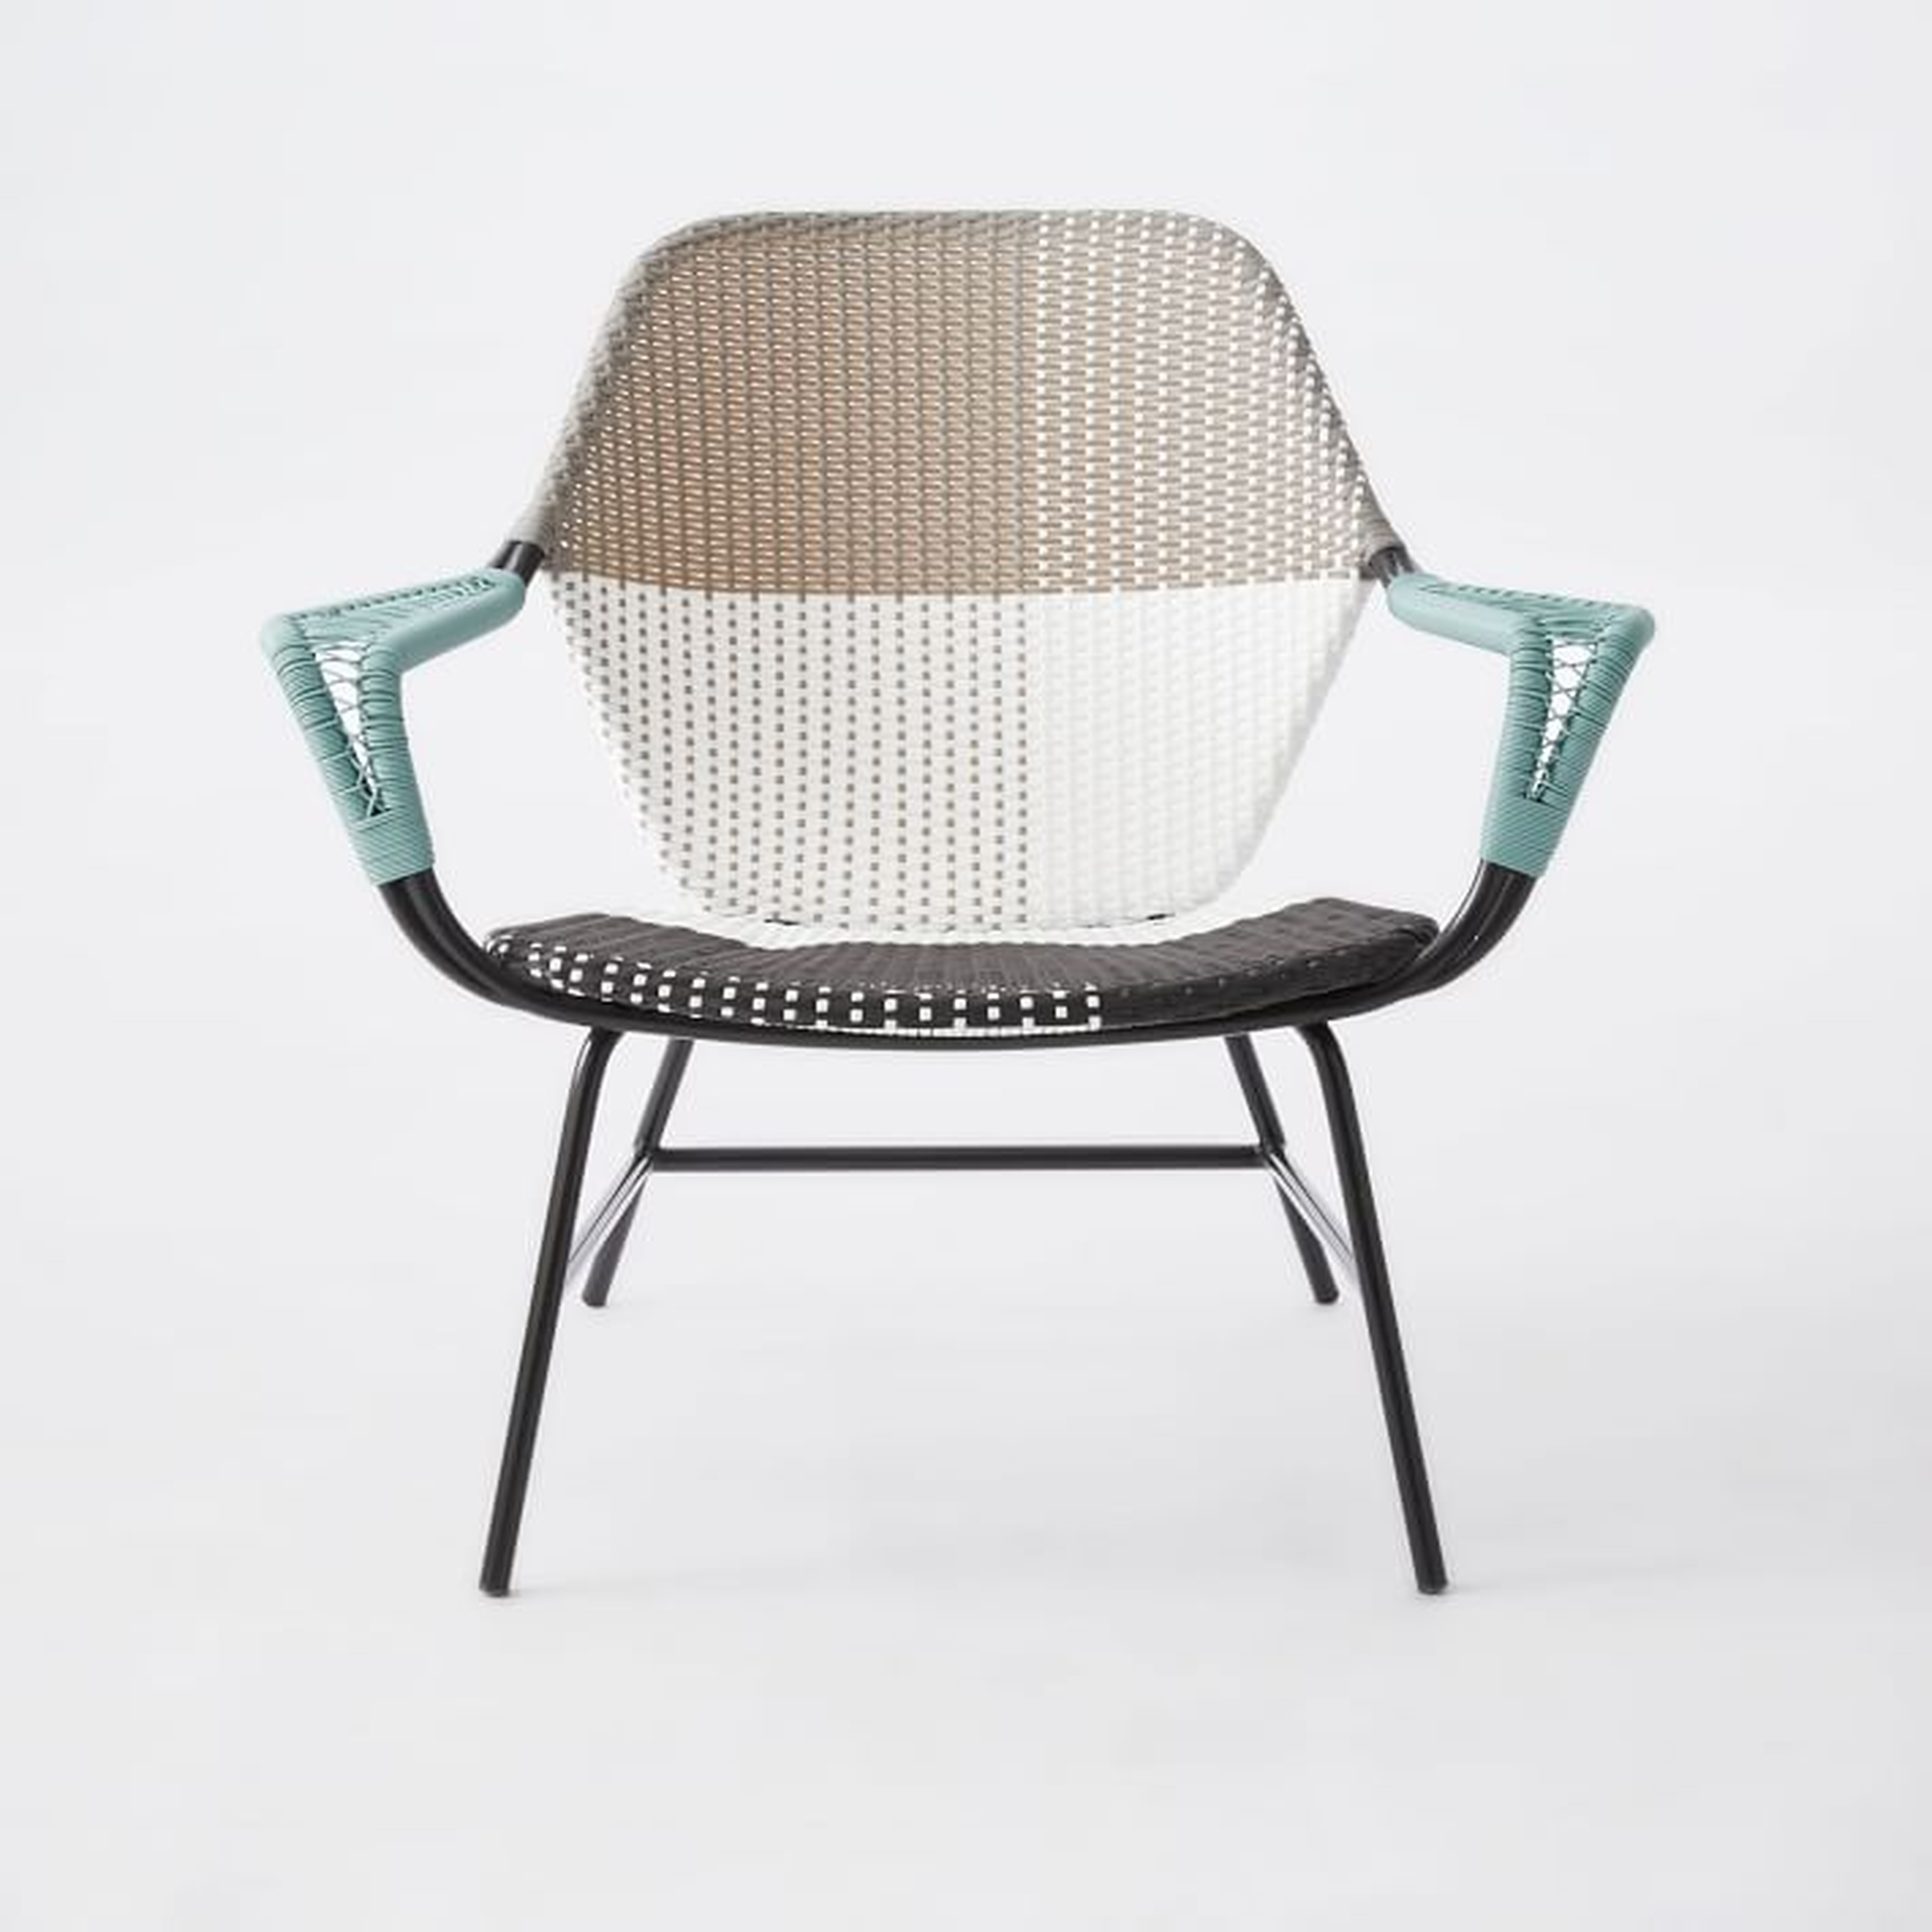 All-Weather Wicker Colorblock Woven Lounge Chair - Gray Tonal - West Elm